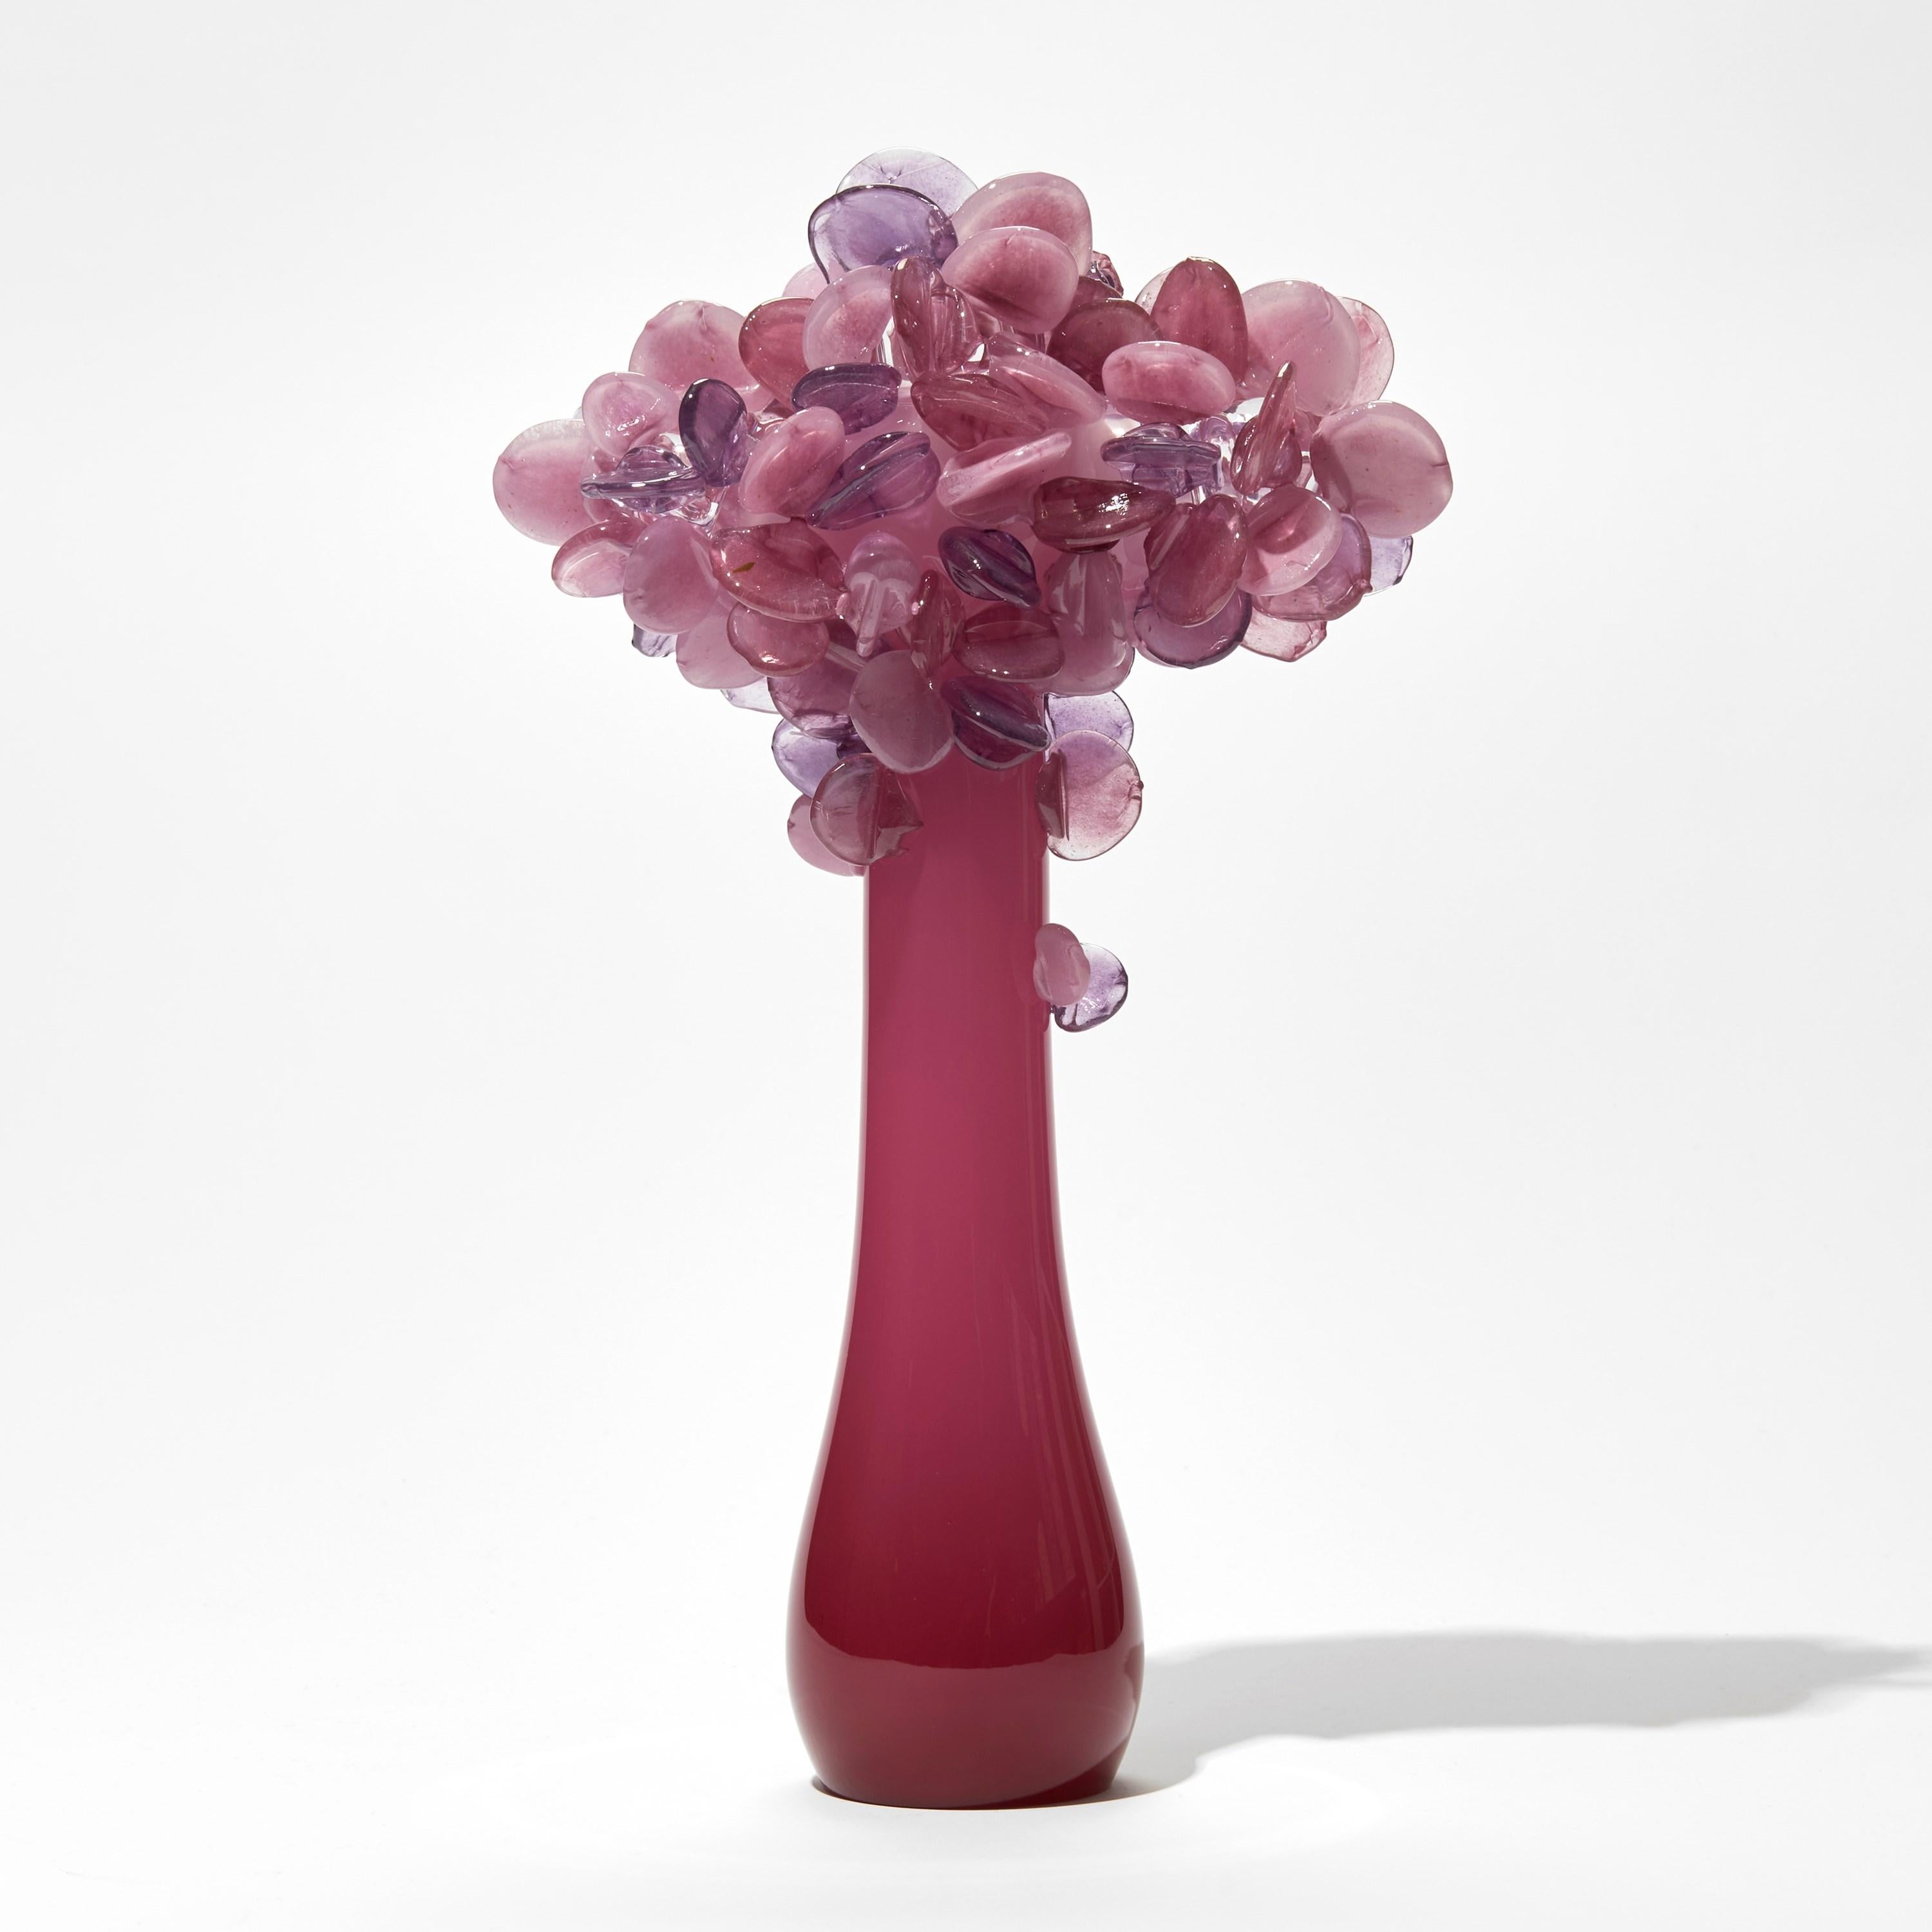 Enchanted dawn in Fuchsia is a unique pink glass tree sculpture by the British artist Louis Thompson. 

With both his Enchanted Dawn and Dusk collections, Thompson brings a joyous and playful element to his glass. Gracious sweeping trunks are